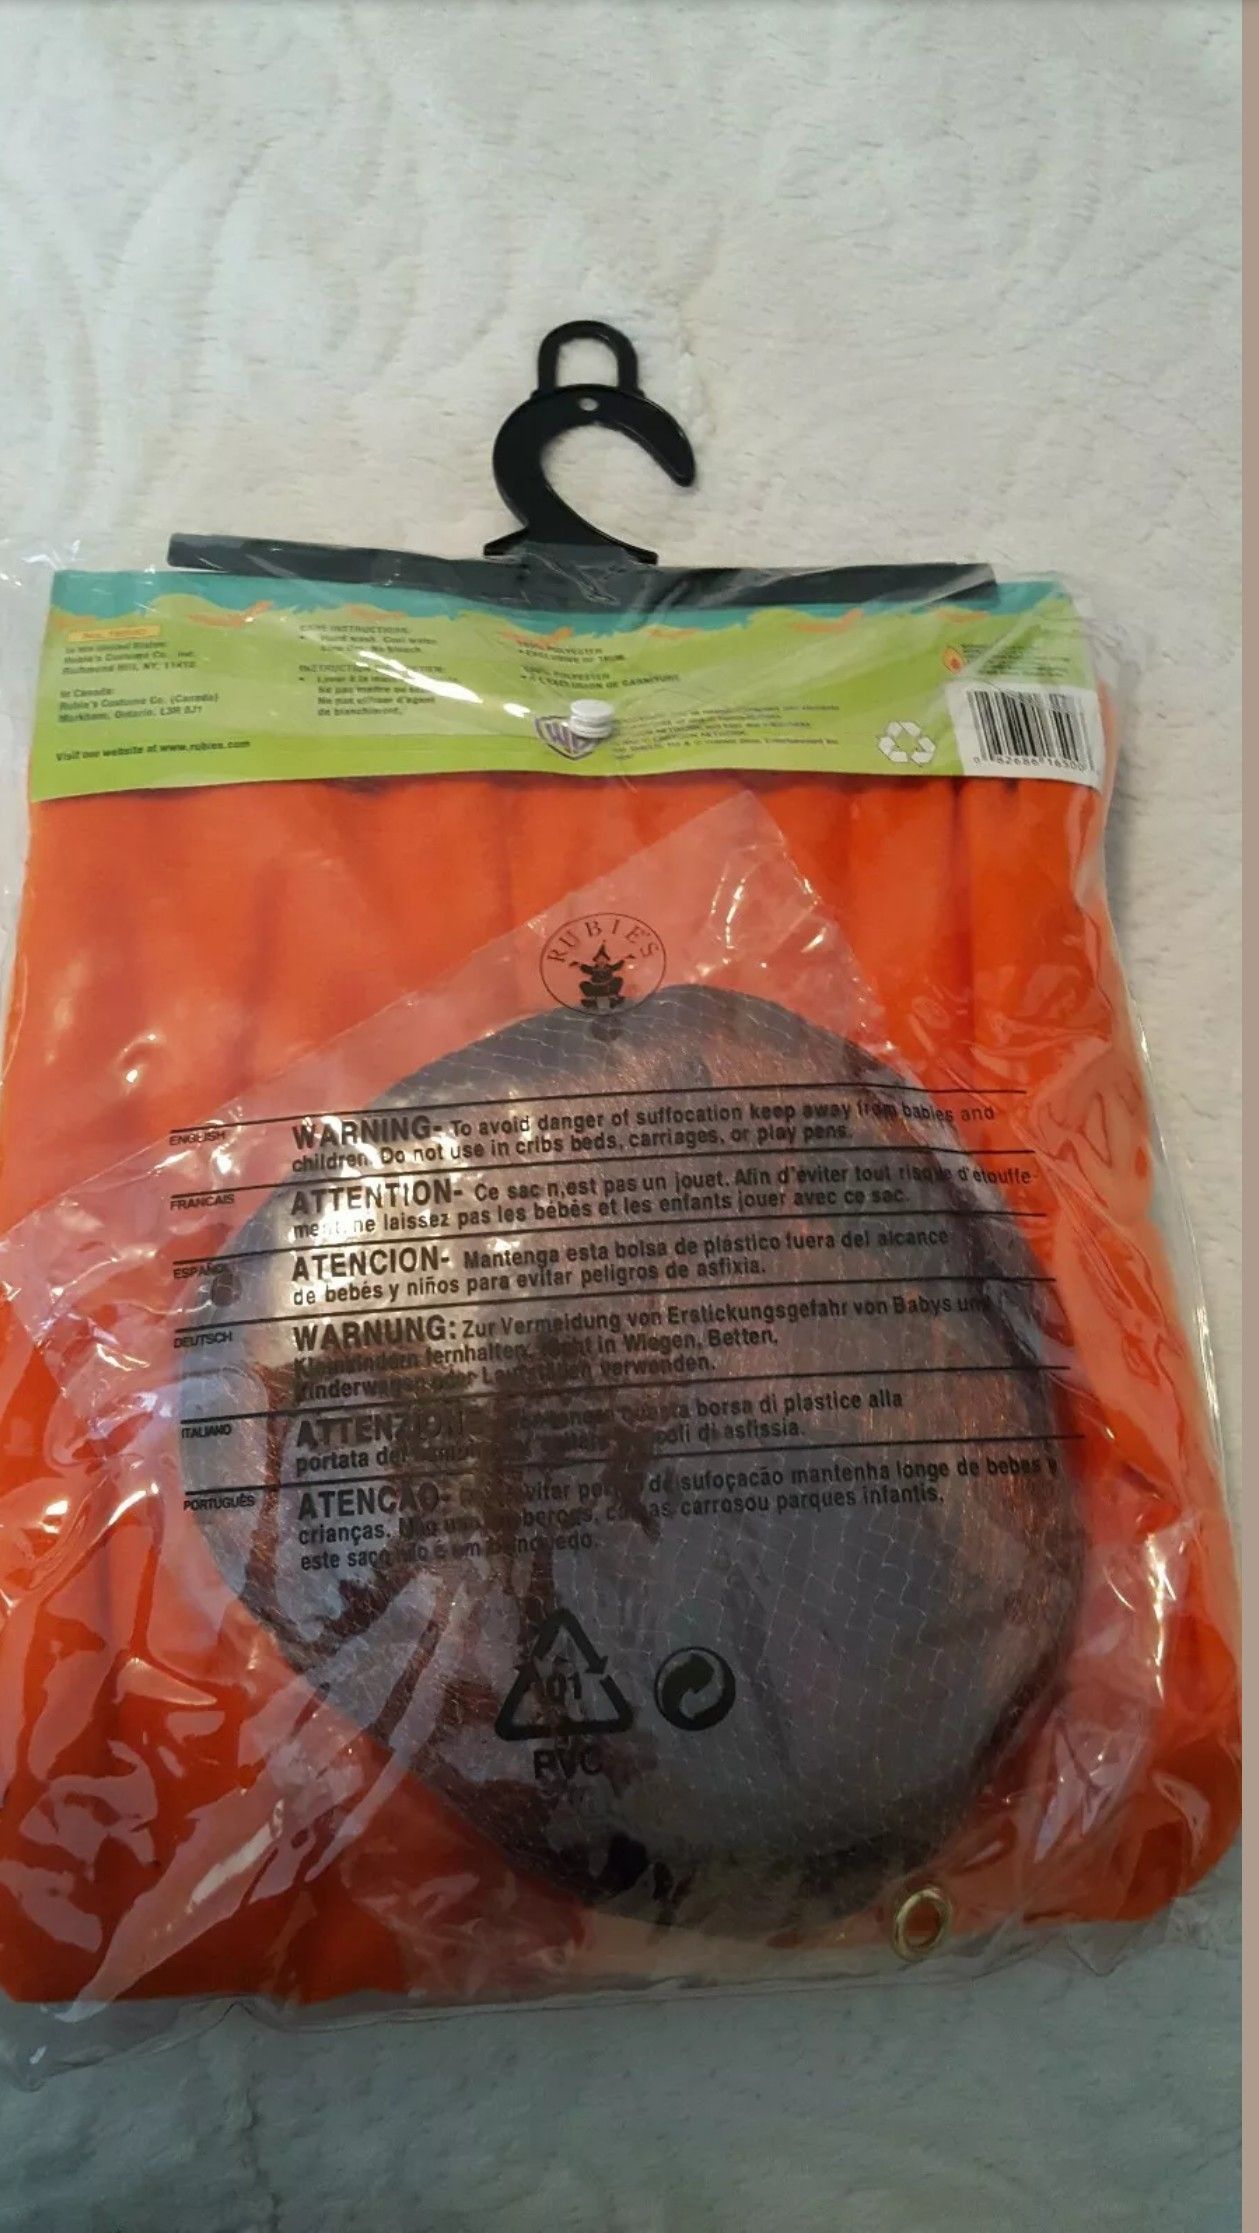 Adult Sassy Scooby Doo Velma Costume Cosplay Lace Thong Panty New w/ tags  for Sale in Marietta, GA - OfferUp